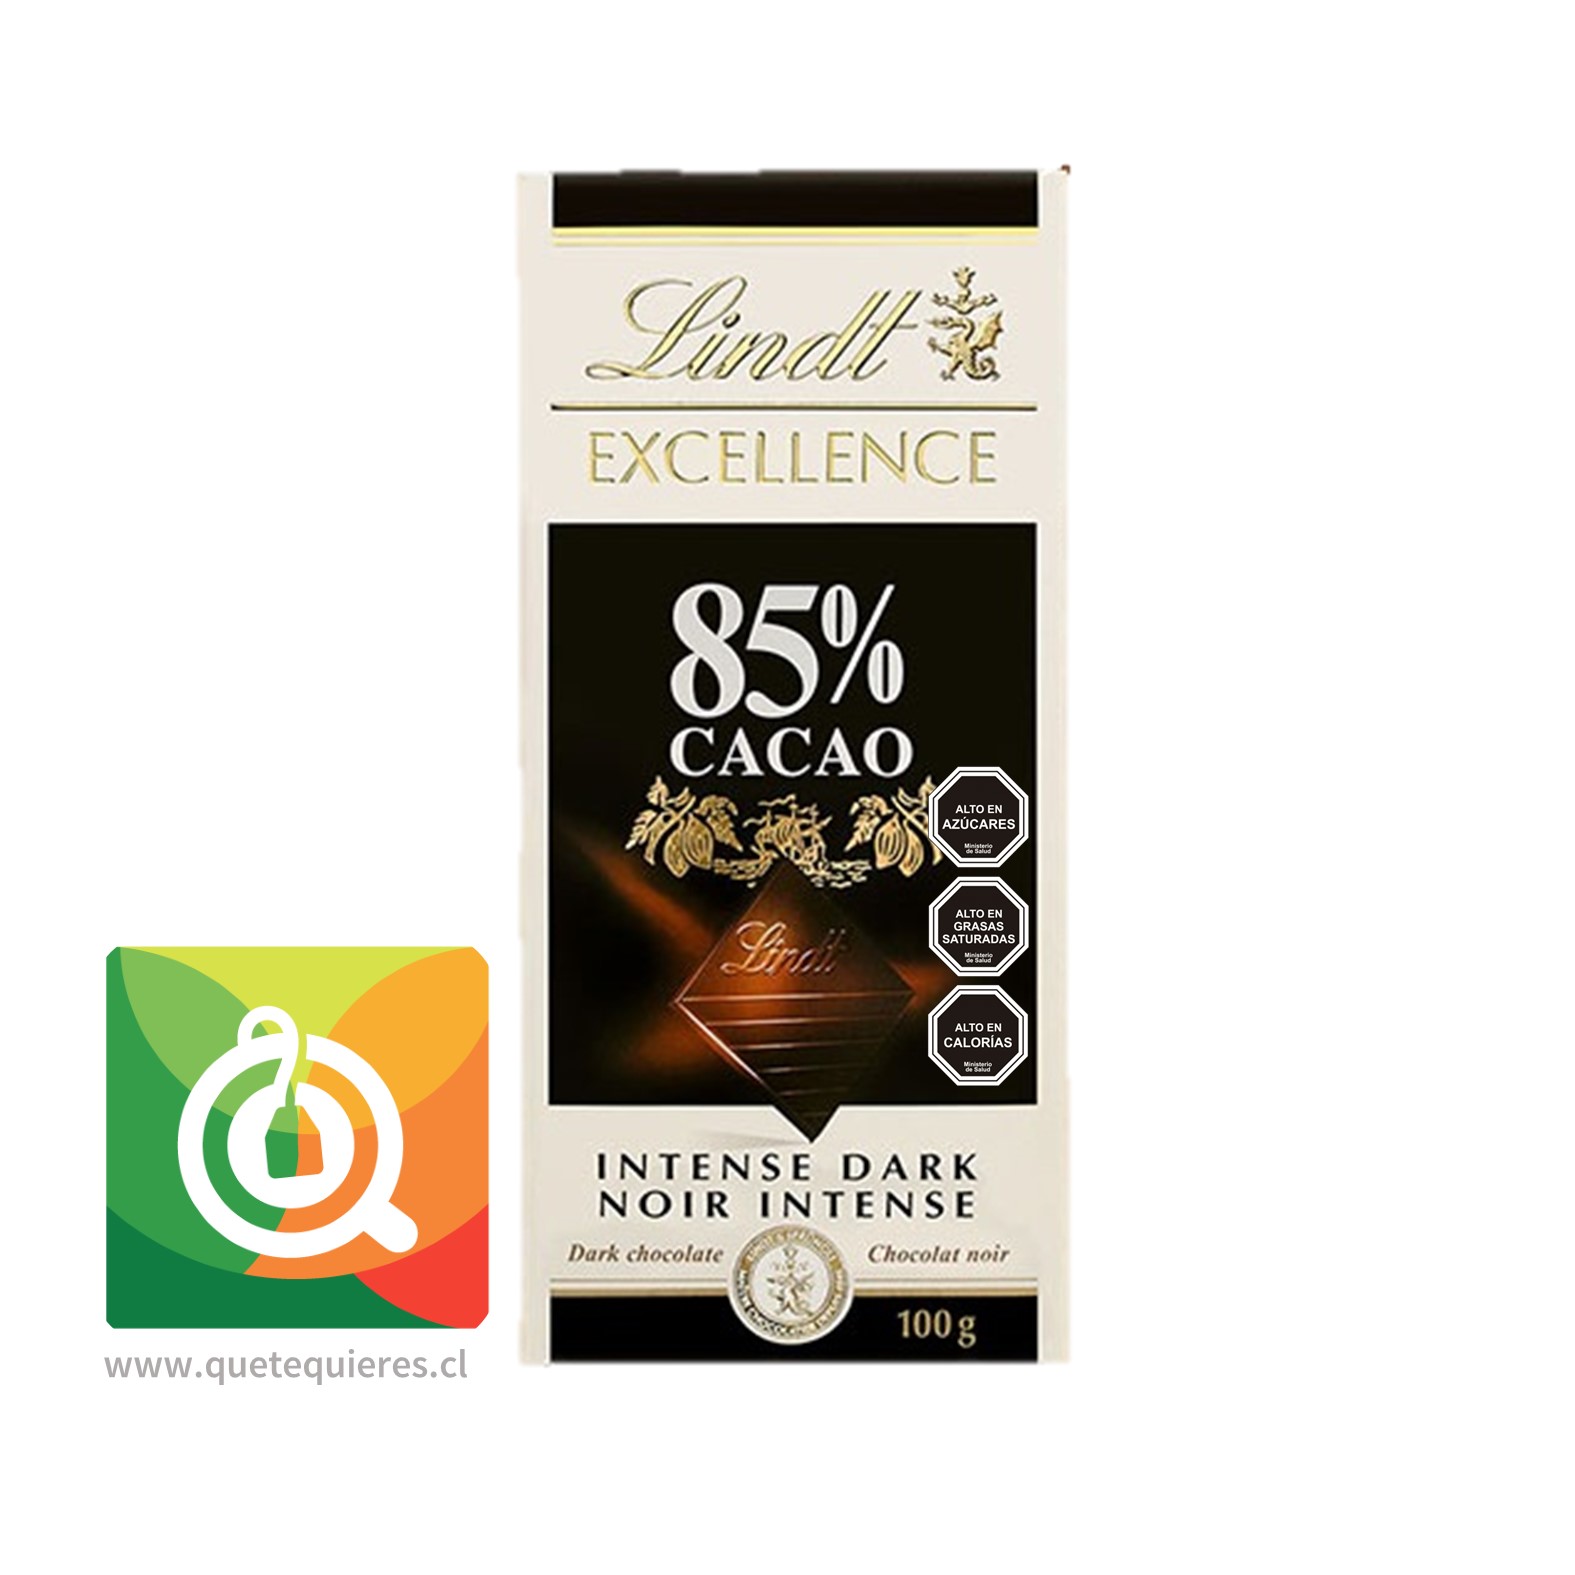 Lindt Chocolate 85% cacao